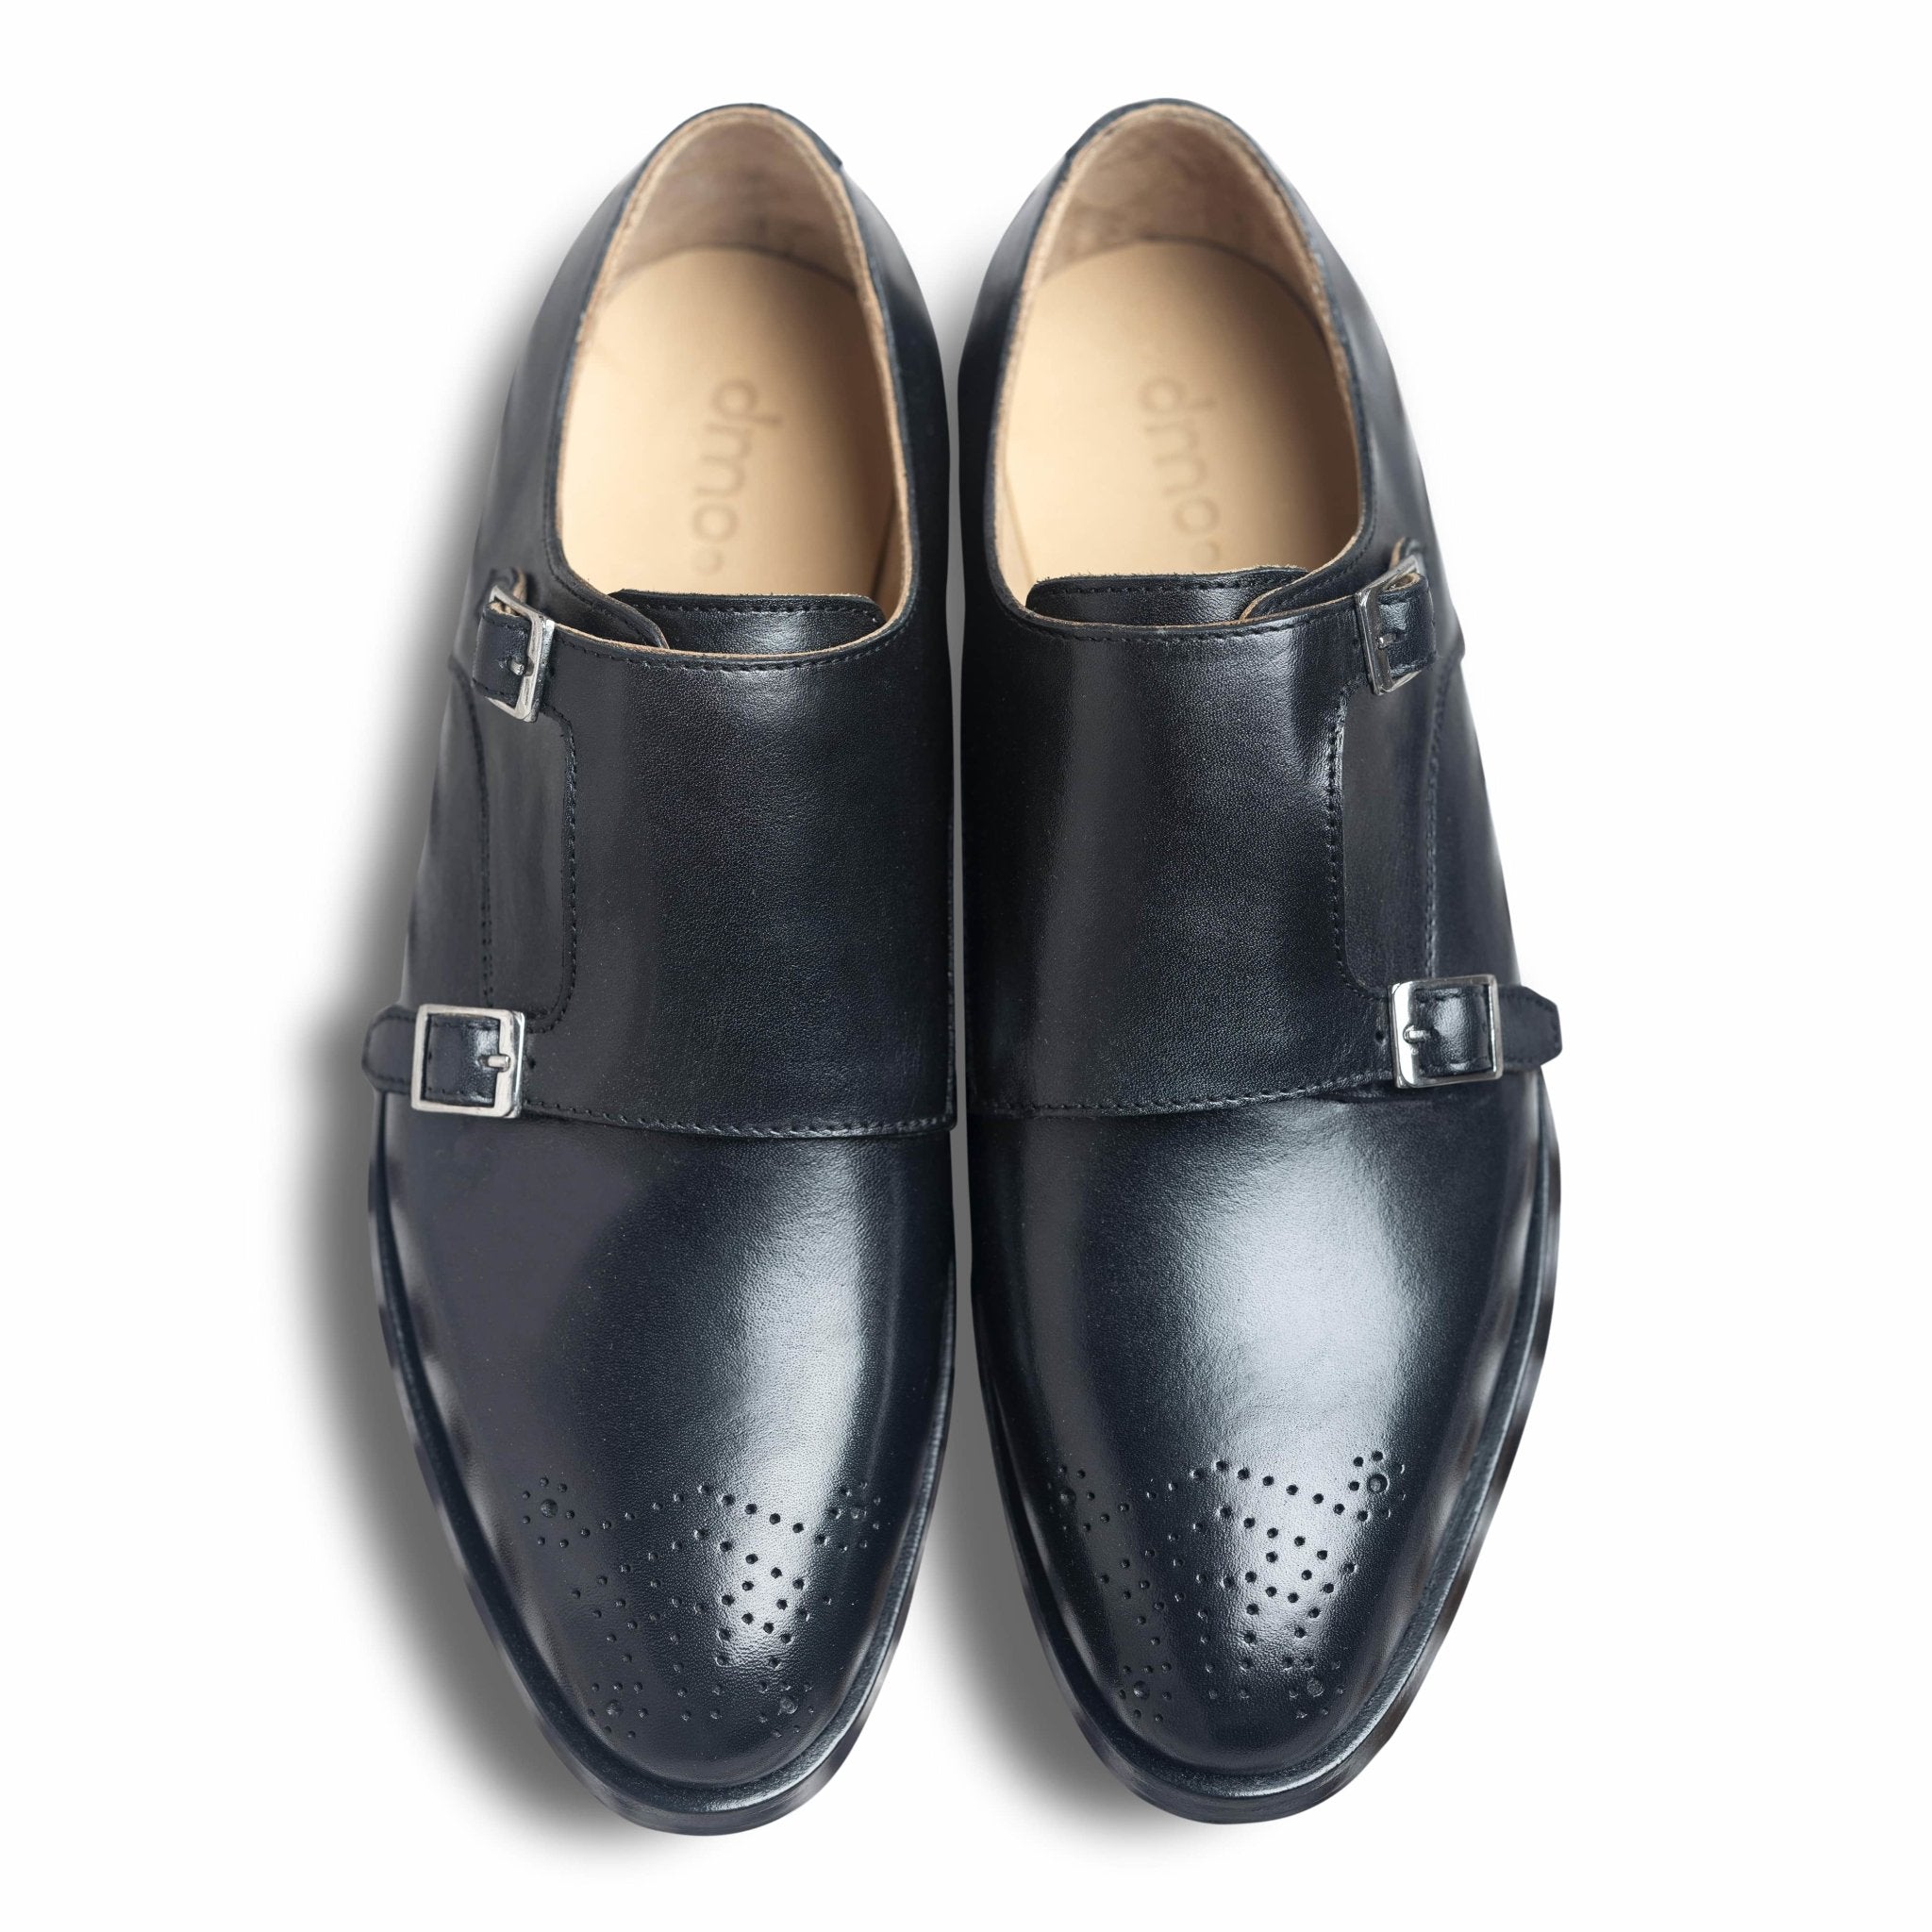 Domo Carboino | Double Monk Strap Leather Shoes for Men | dmodot